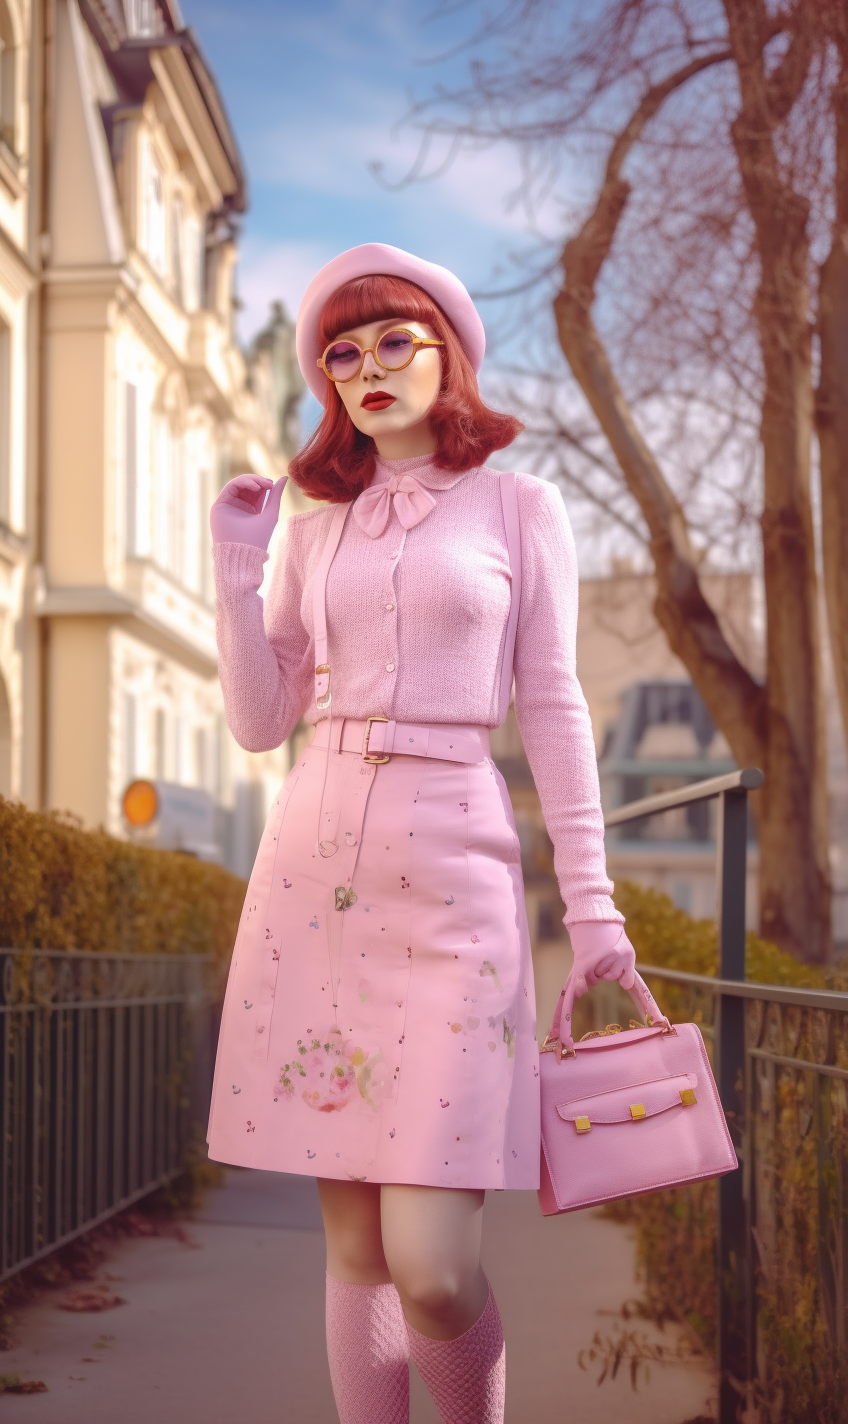 Woman in a bright pink outfit walking the streets of London, wearing sunglasses and a pink beret, gloves, socks, and purse, with a bright red bob, reminiscent of the Marvelous Mrs. Maisel. Created using Midjourney.